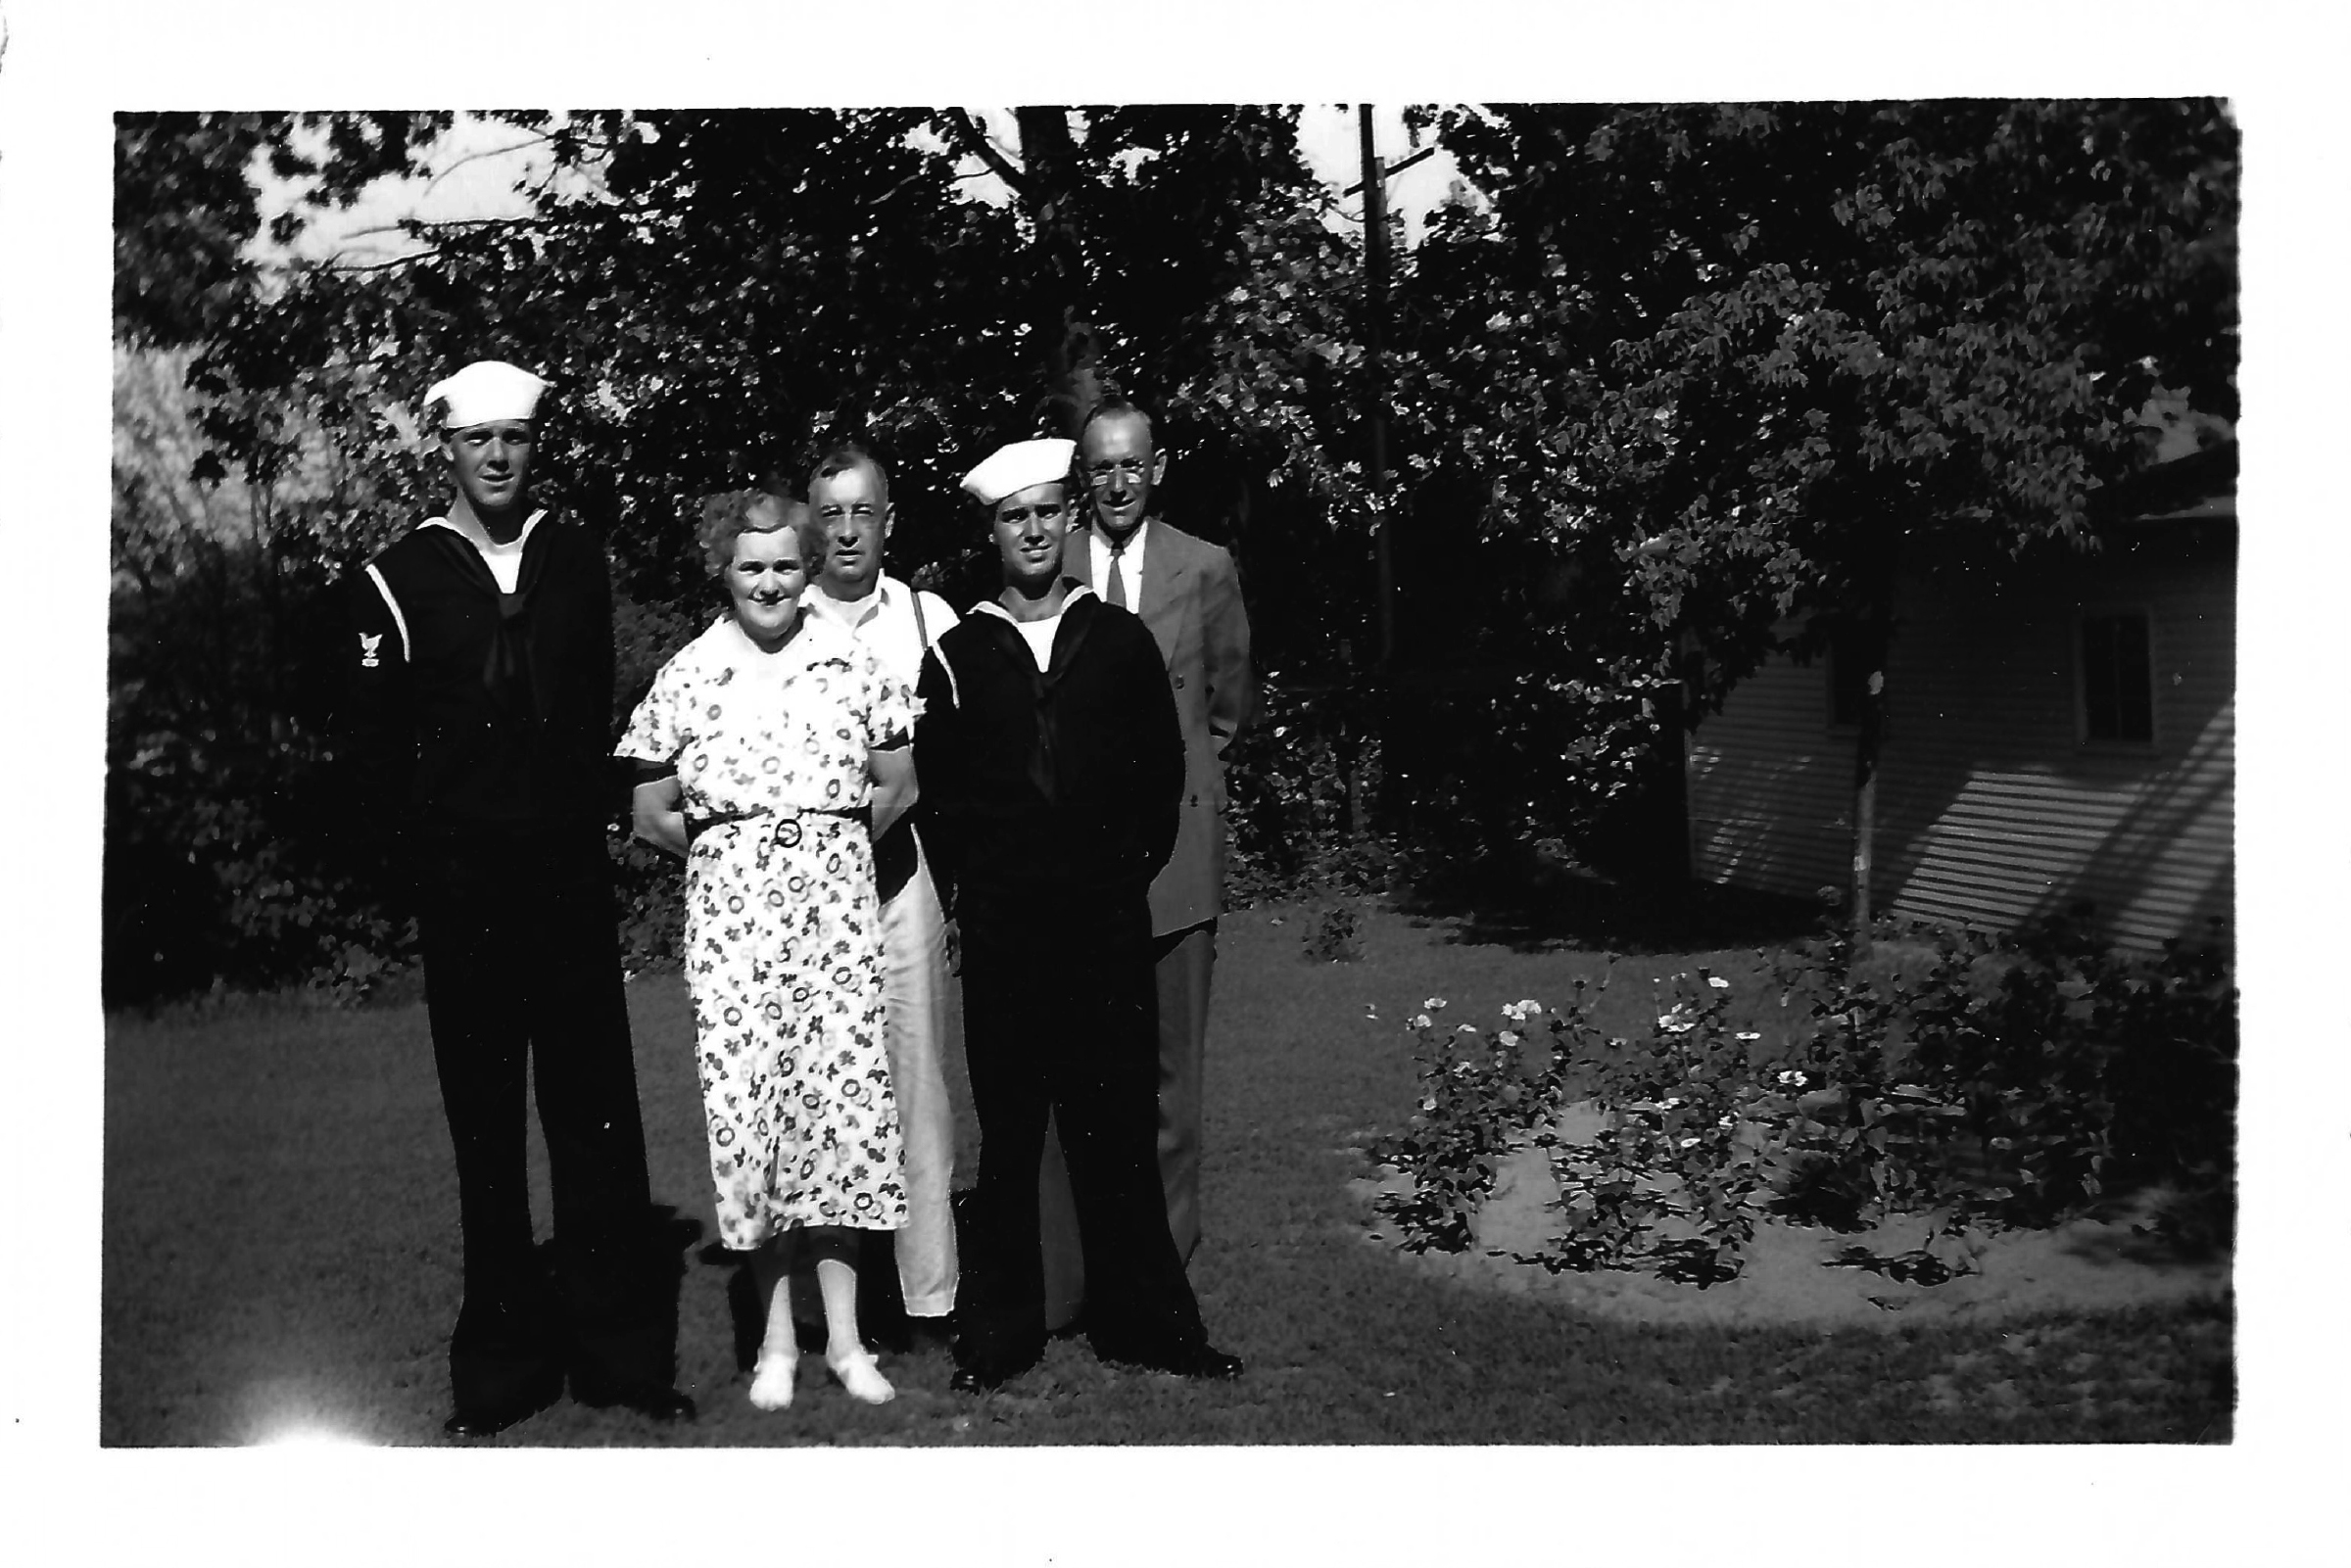 From left: Harold Trapp, mother Lillie Trapp, father William E. Trapp, William Trapp, and family friend Lambert Zeephat in August 1939 (Courtesy Carol Sowar)